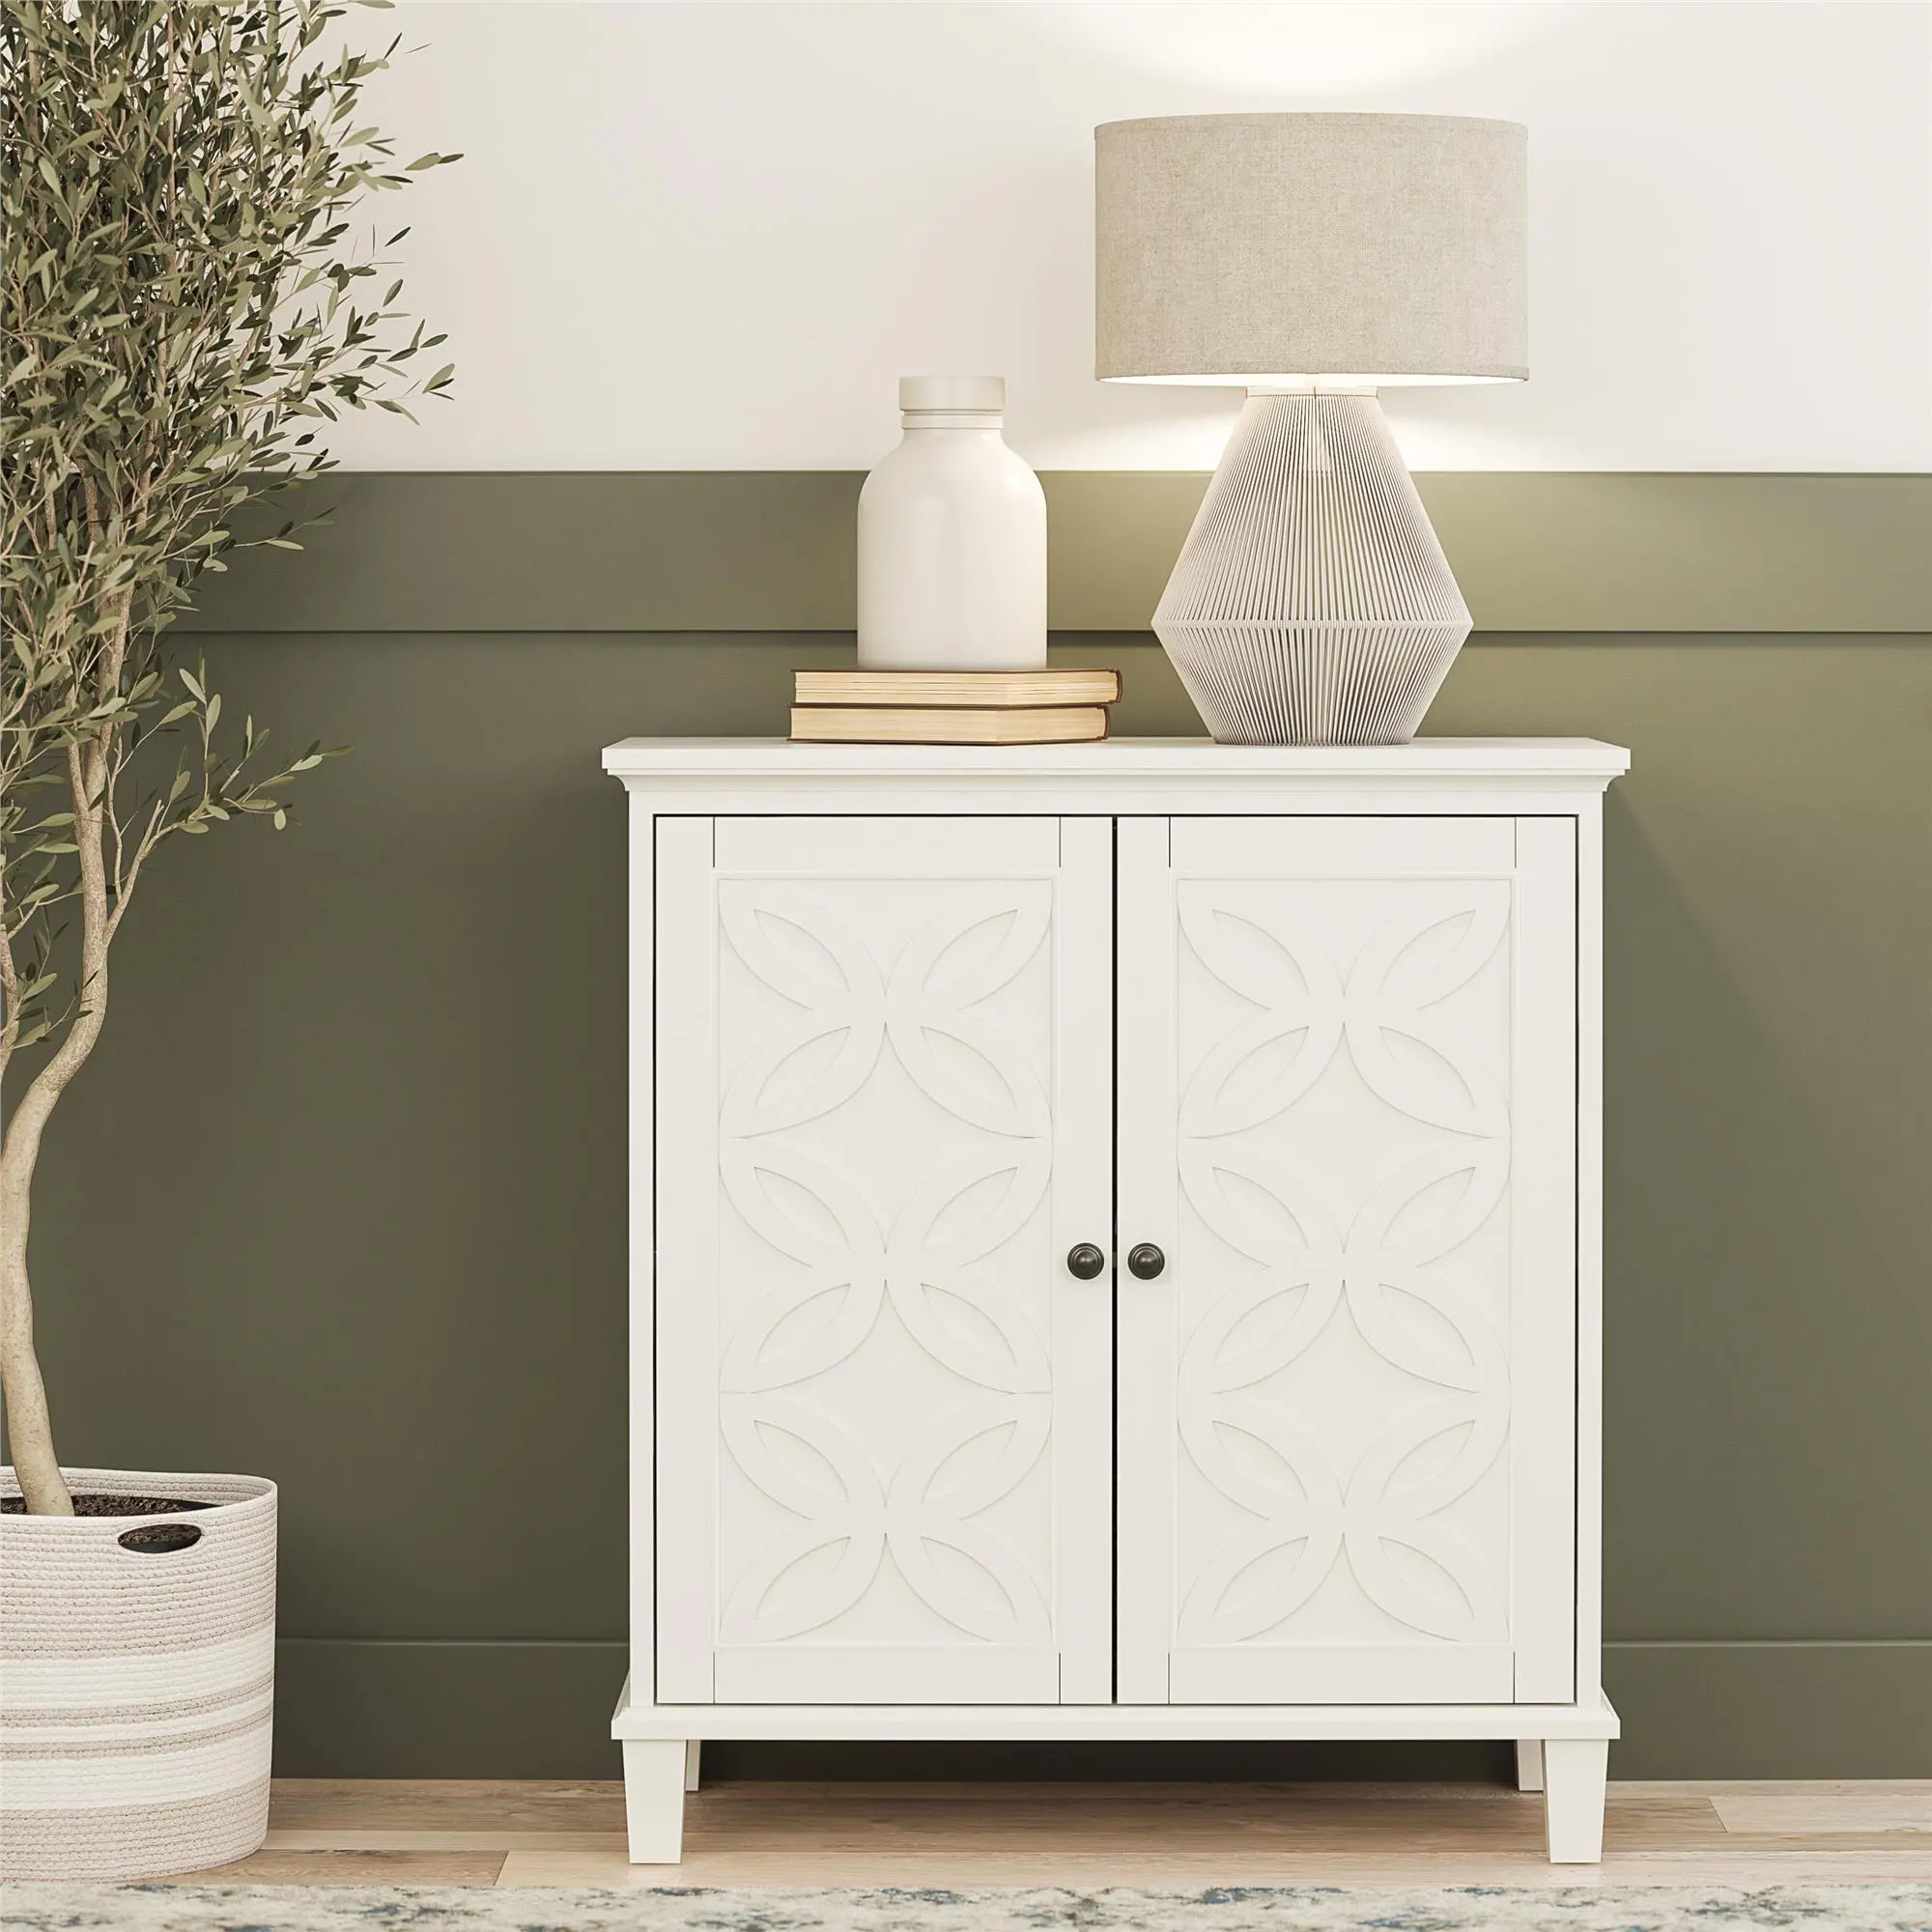 Photos - Dresser / Chests of Drawers Dorel Home Celeste White Double Door Accent Cabinet 3960013COM